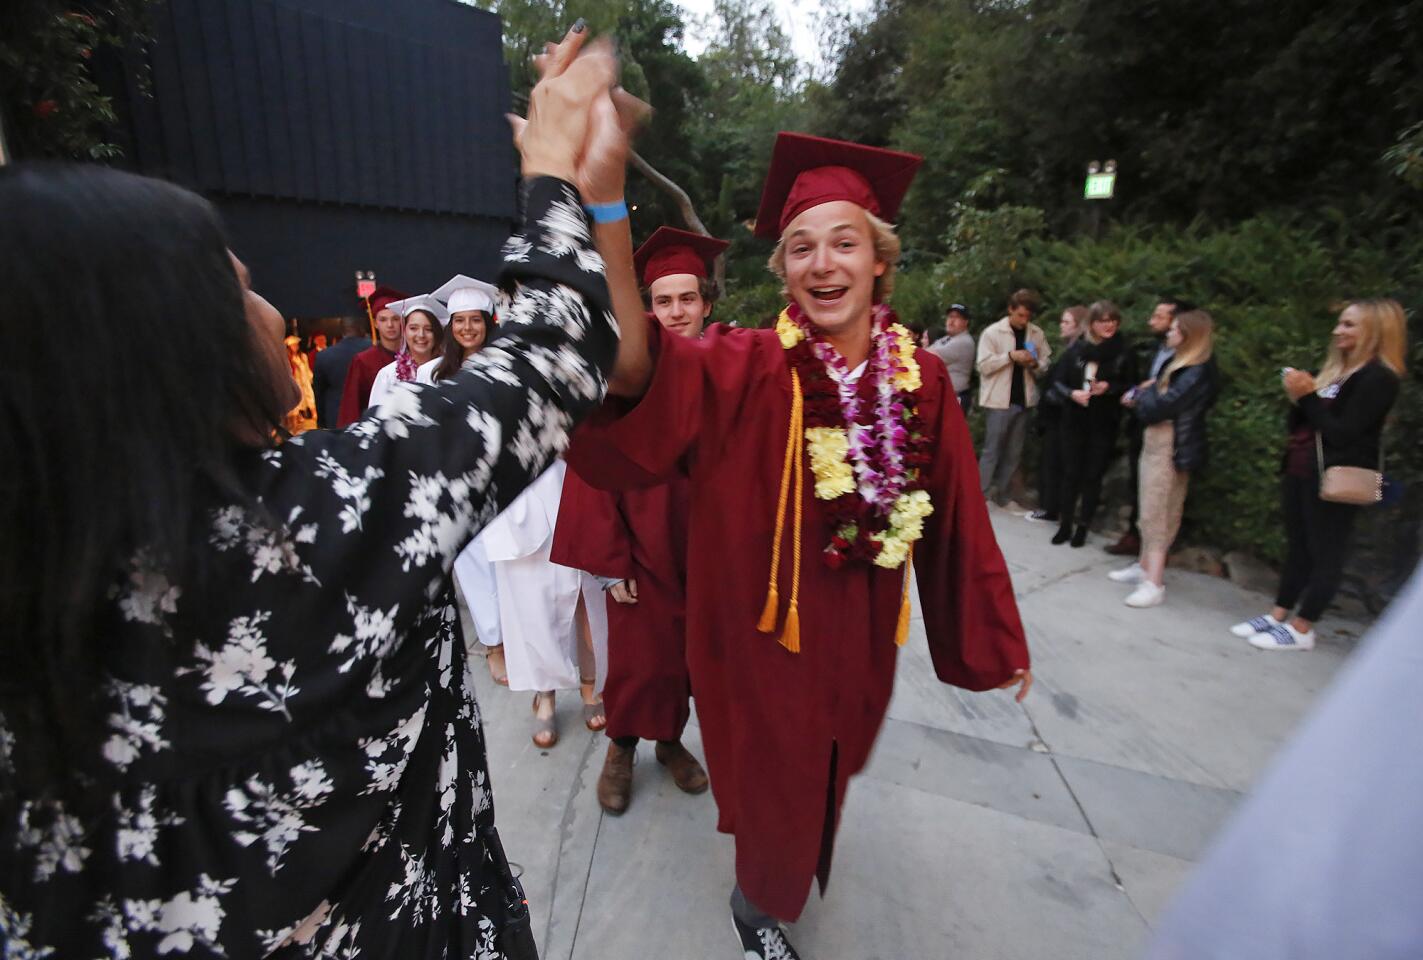 Summa Cum Laude graduate George Knapp, right, greets attendance administrator Connie Byrnes, as he enters the Irvine Bowl during the Laguna Beach High School commencement ceremony on Thursday.